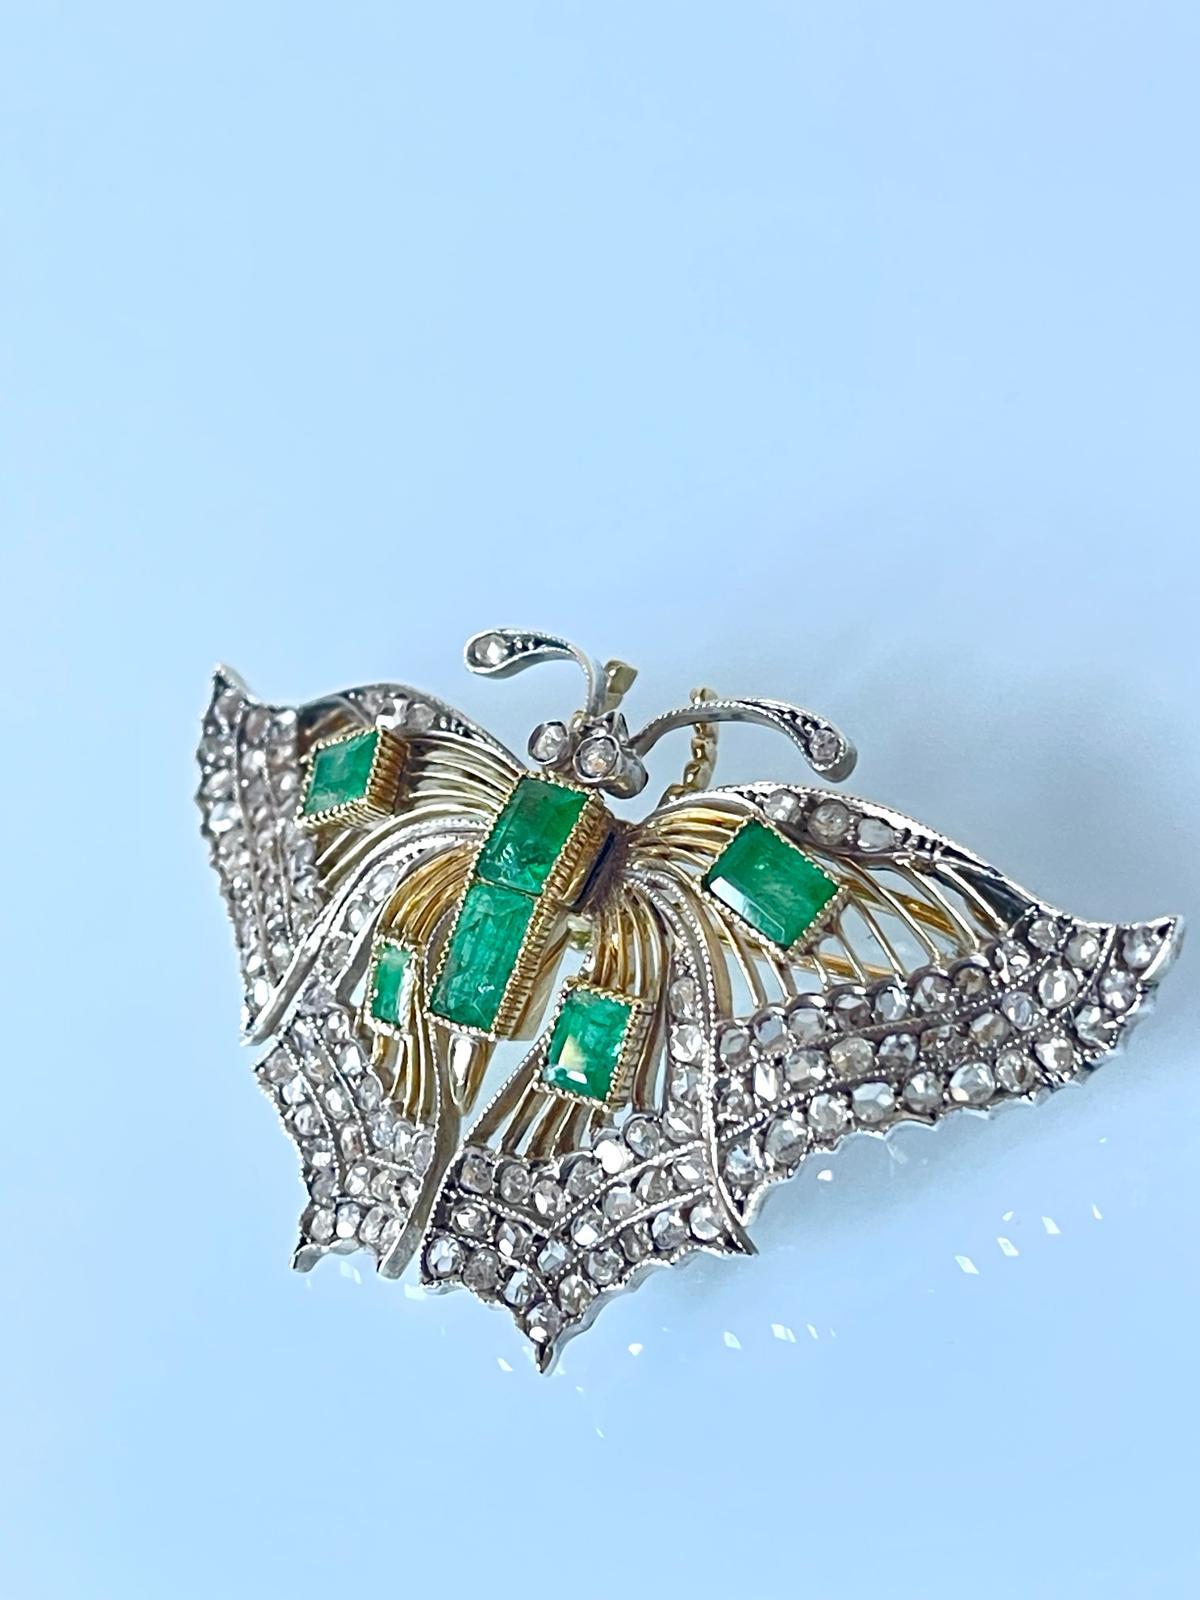 Antique Victorian 18K Gold Silver Diamond Emerald Butterfly Brooch C 1880 In Good Condition For Sale In Firenze, IT